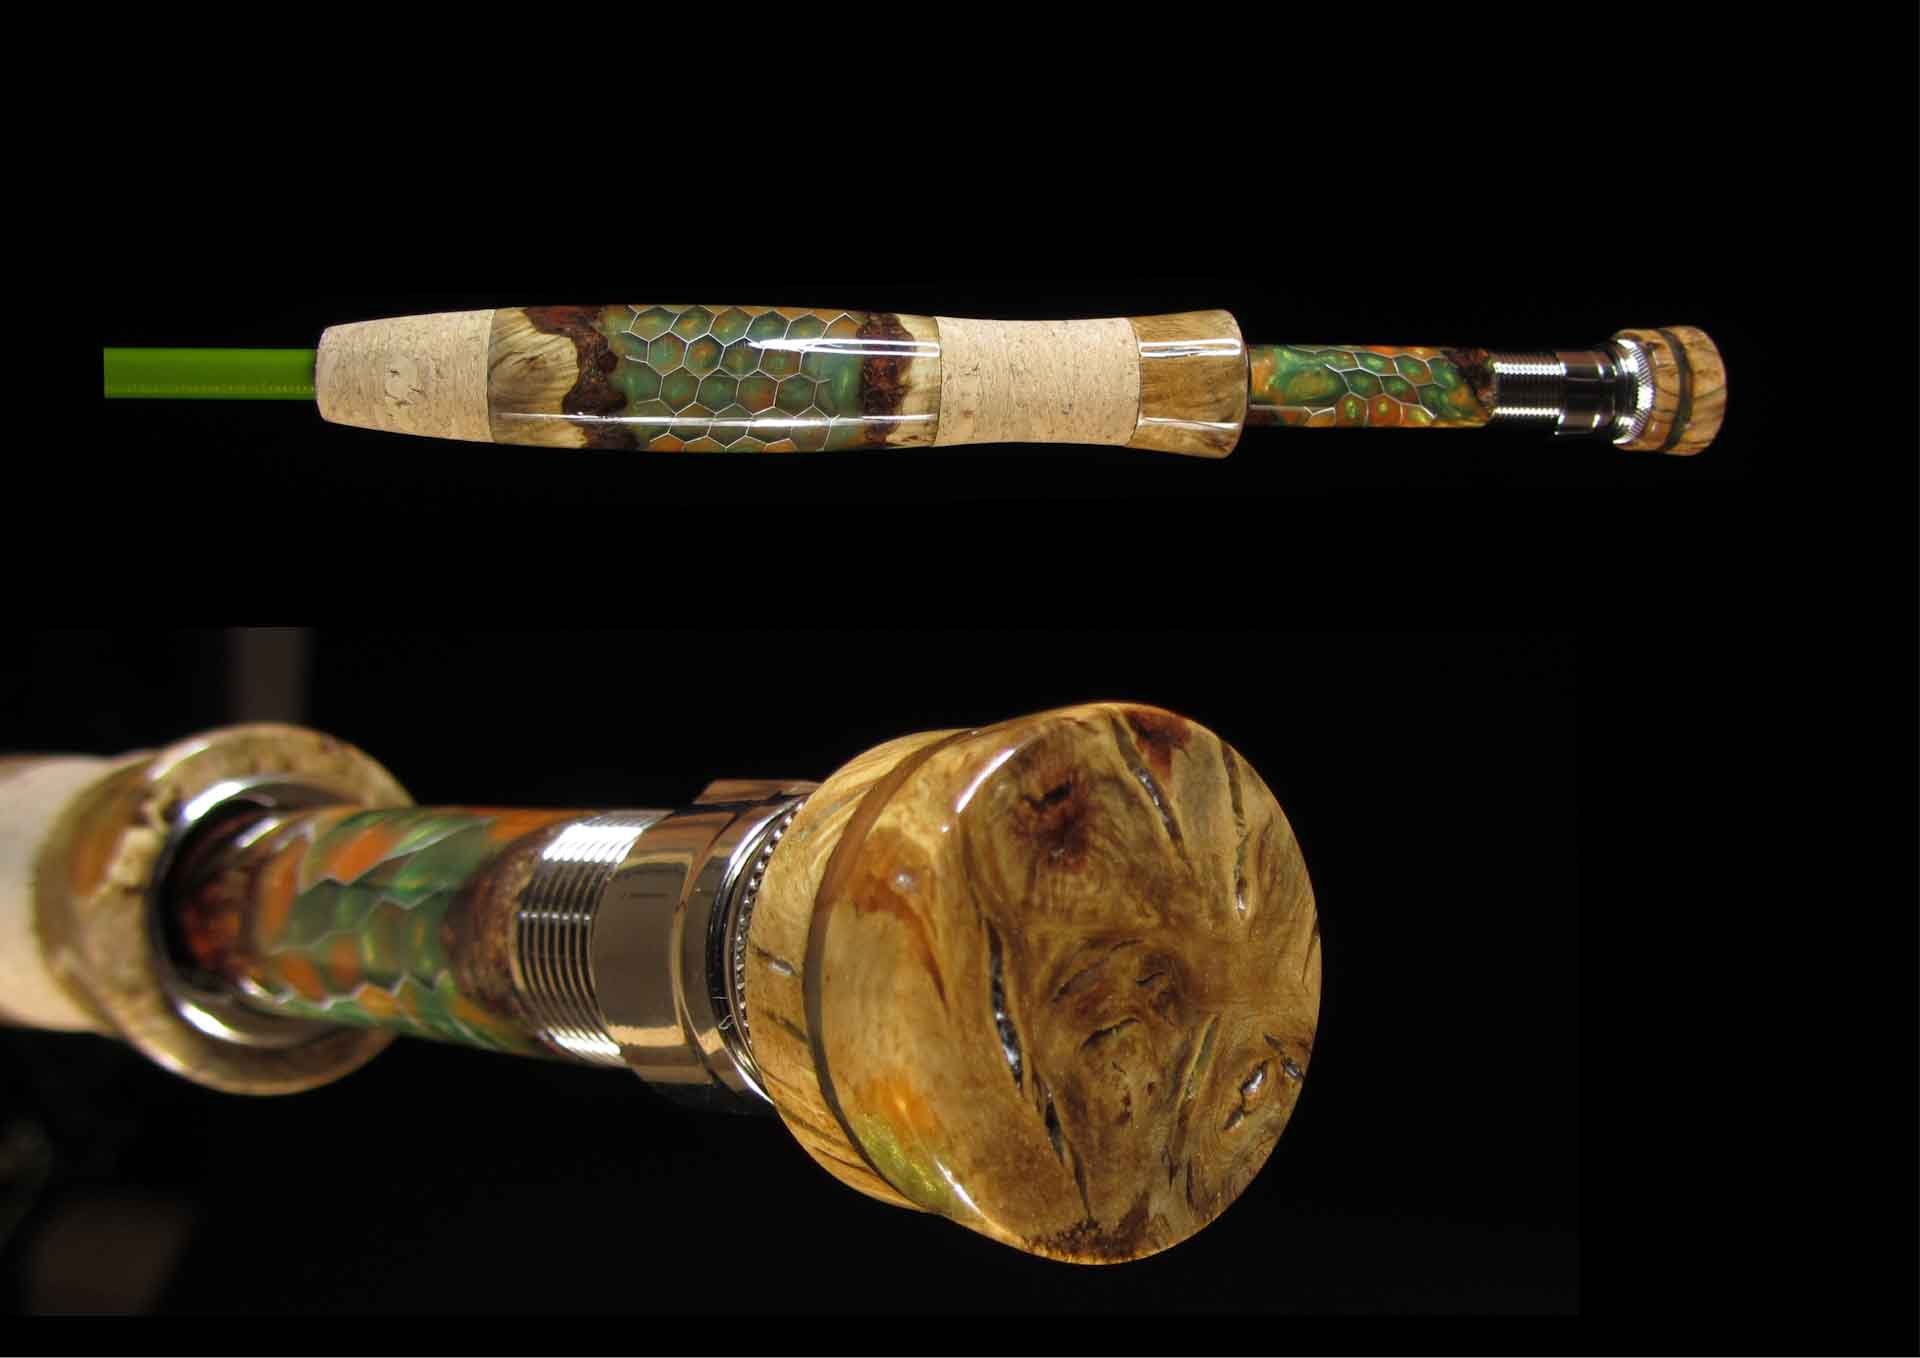 custom fly fishing rods made in the uk , built on epic , cts , sage and  harrison blanks, Resilure Custom fishing rods